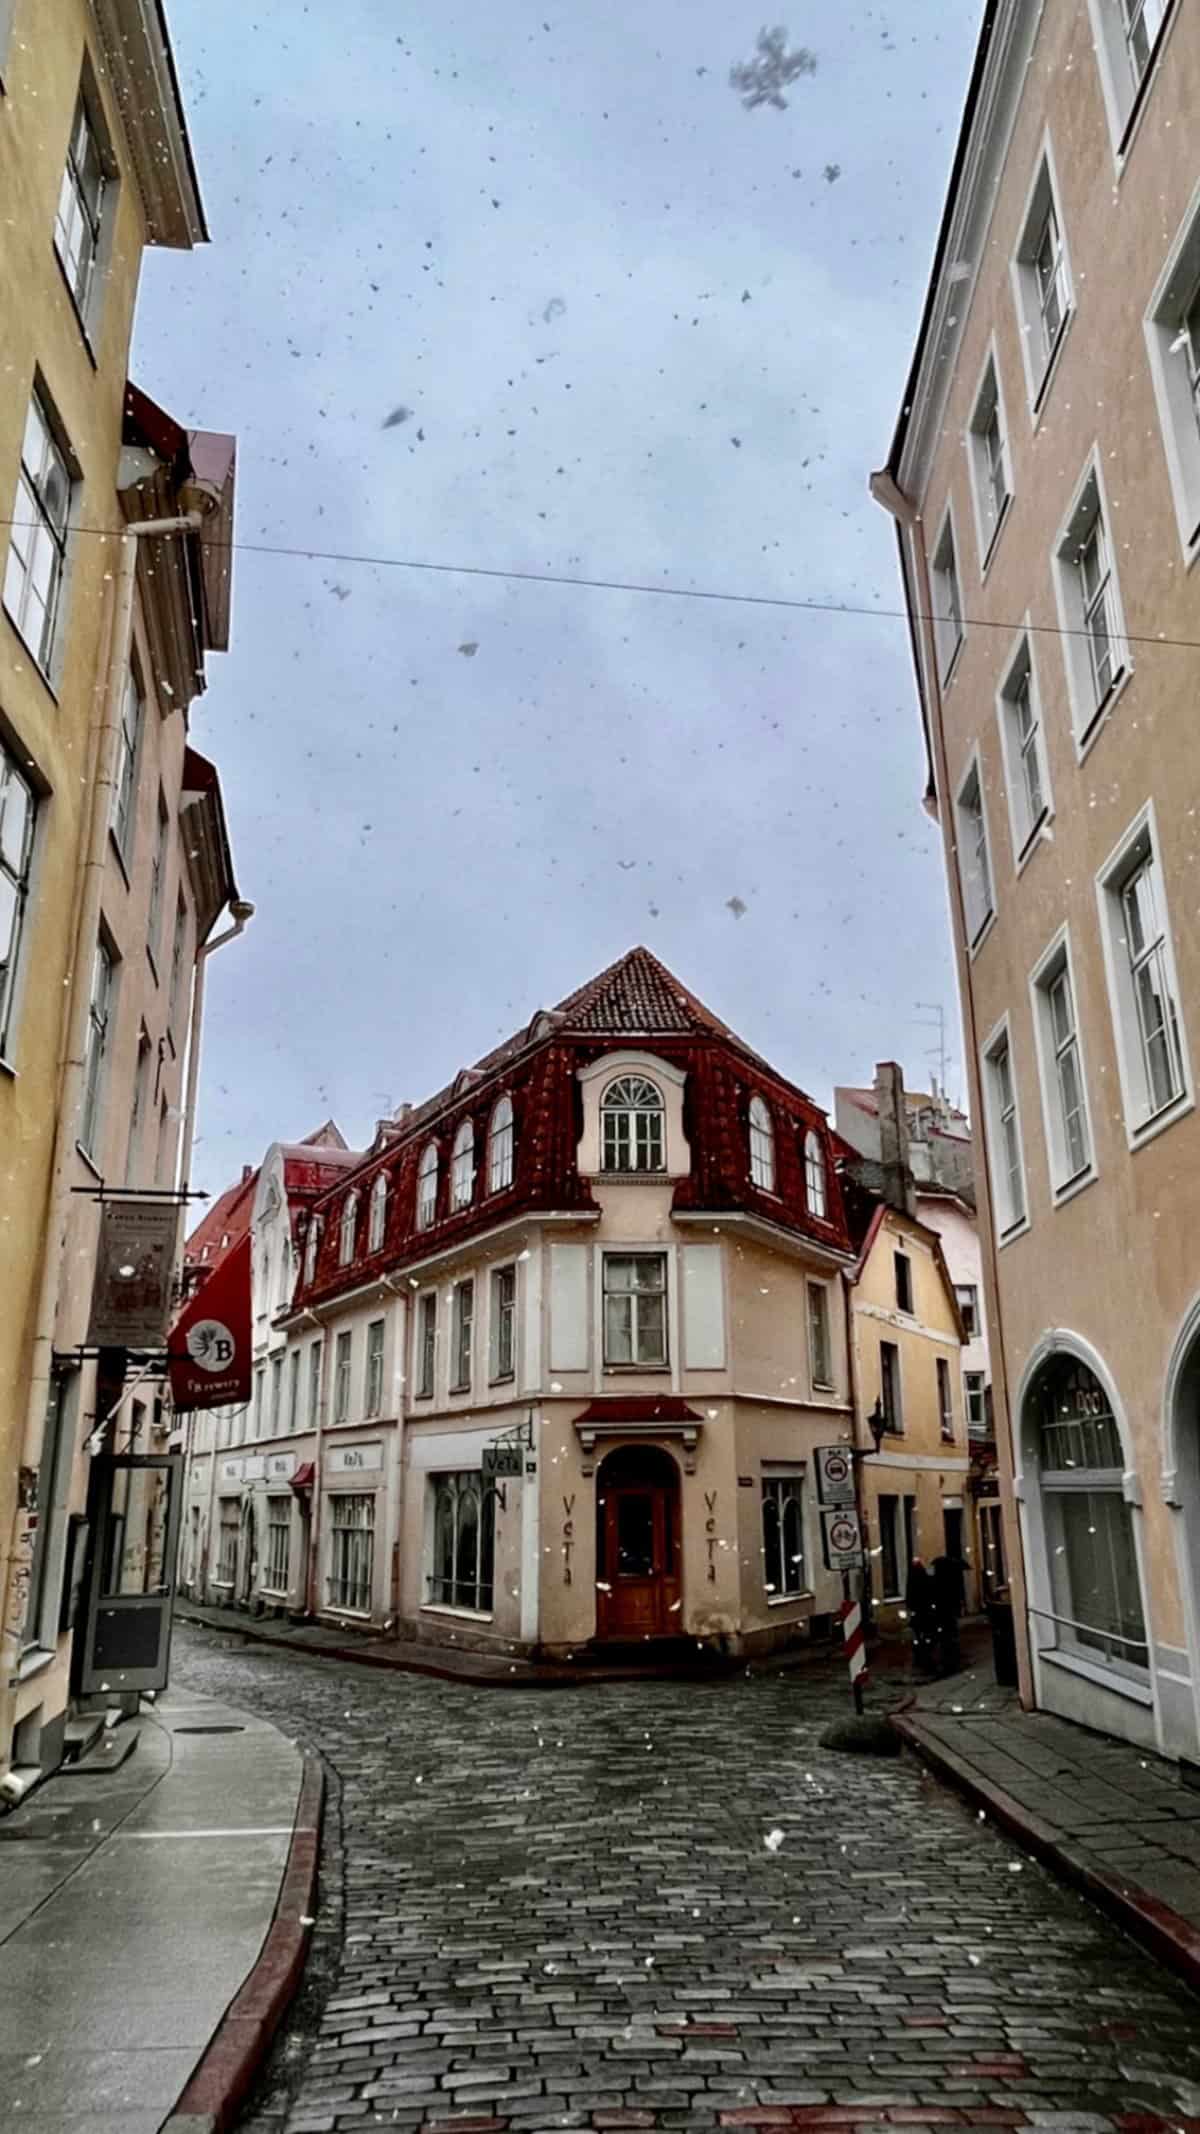 Snow coming down in the Old Town of Tallinn, Estonia